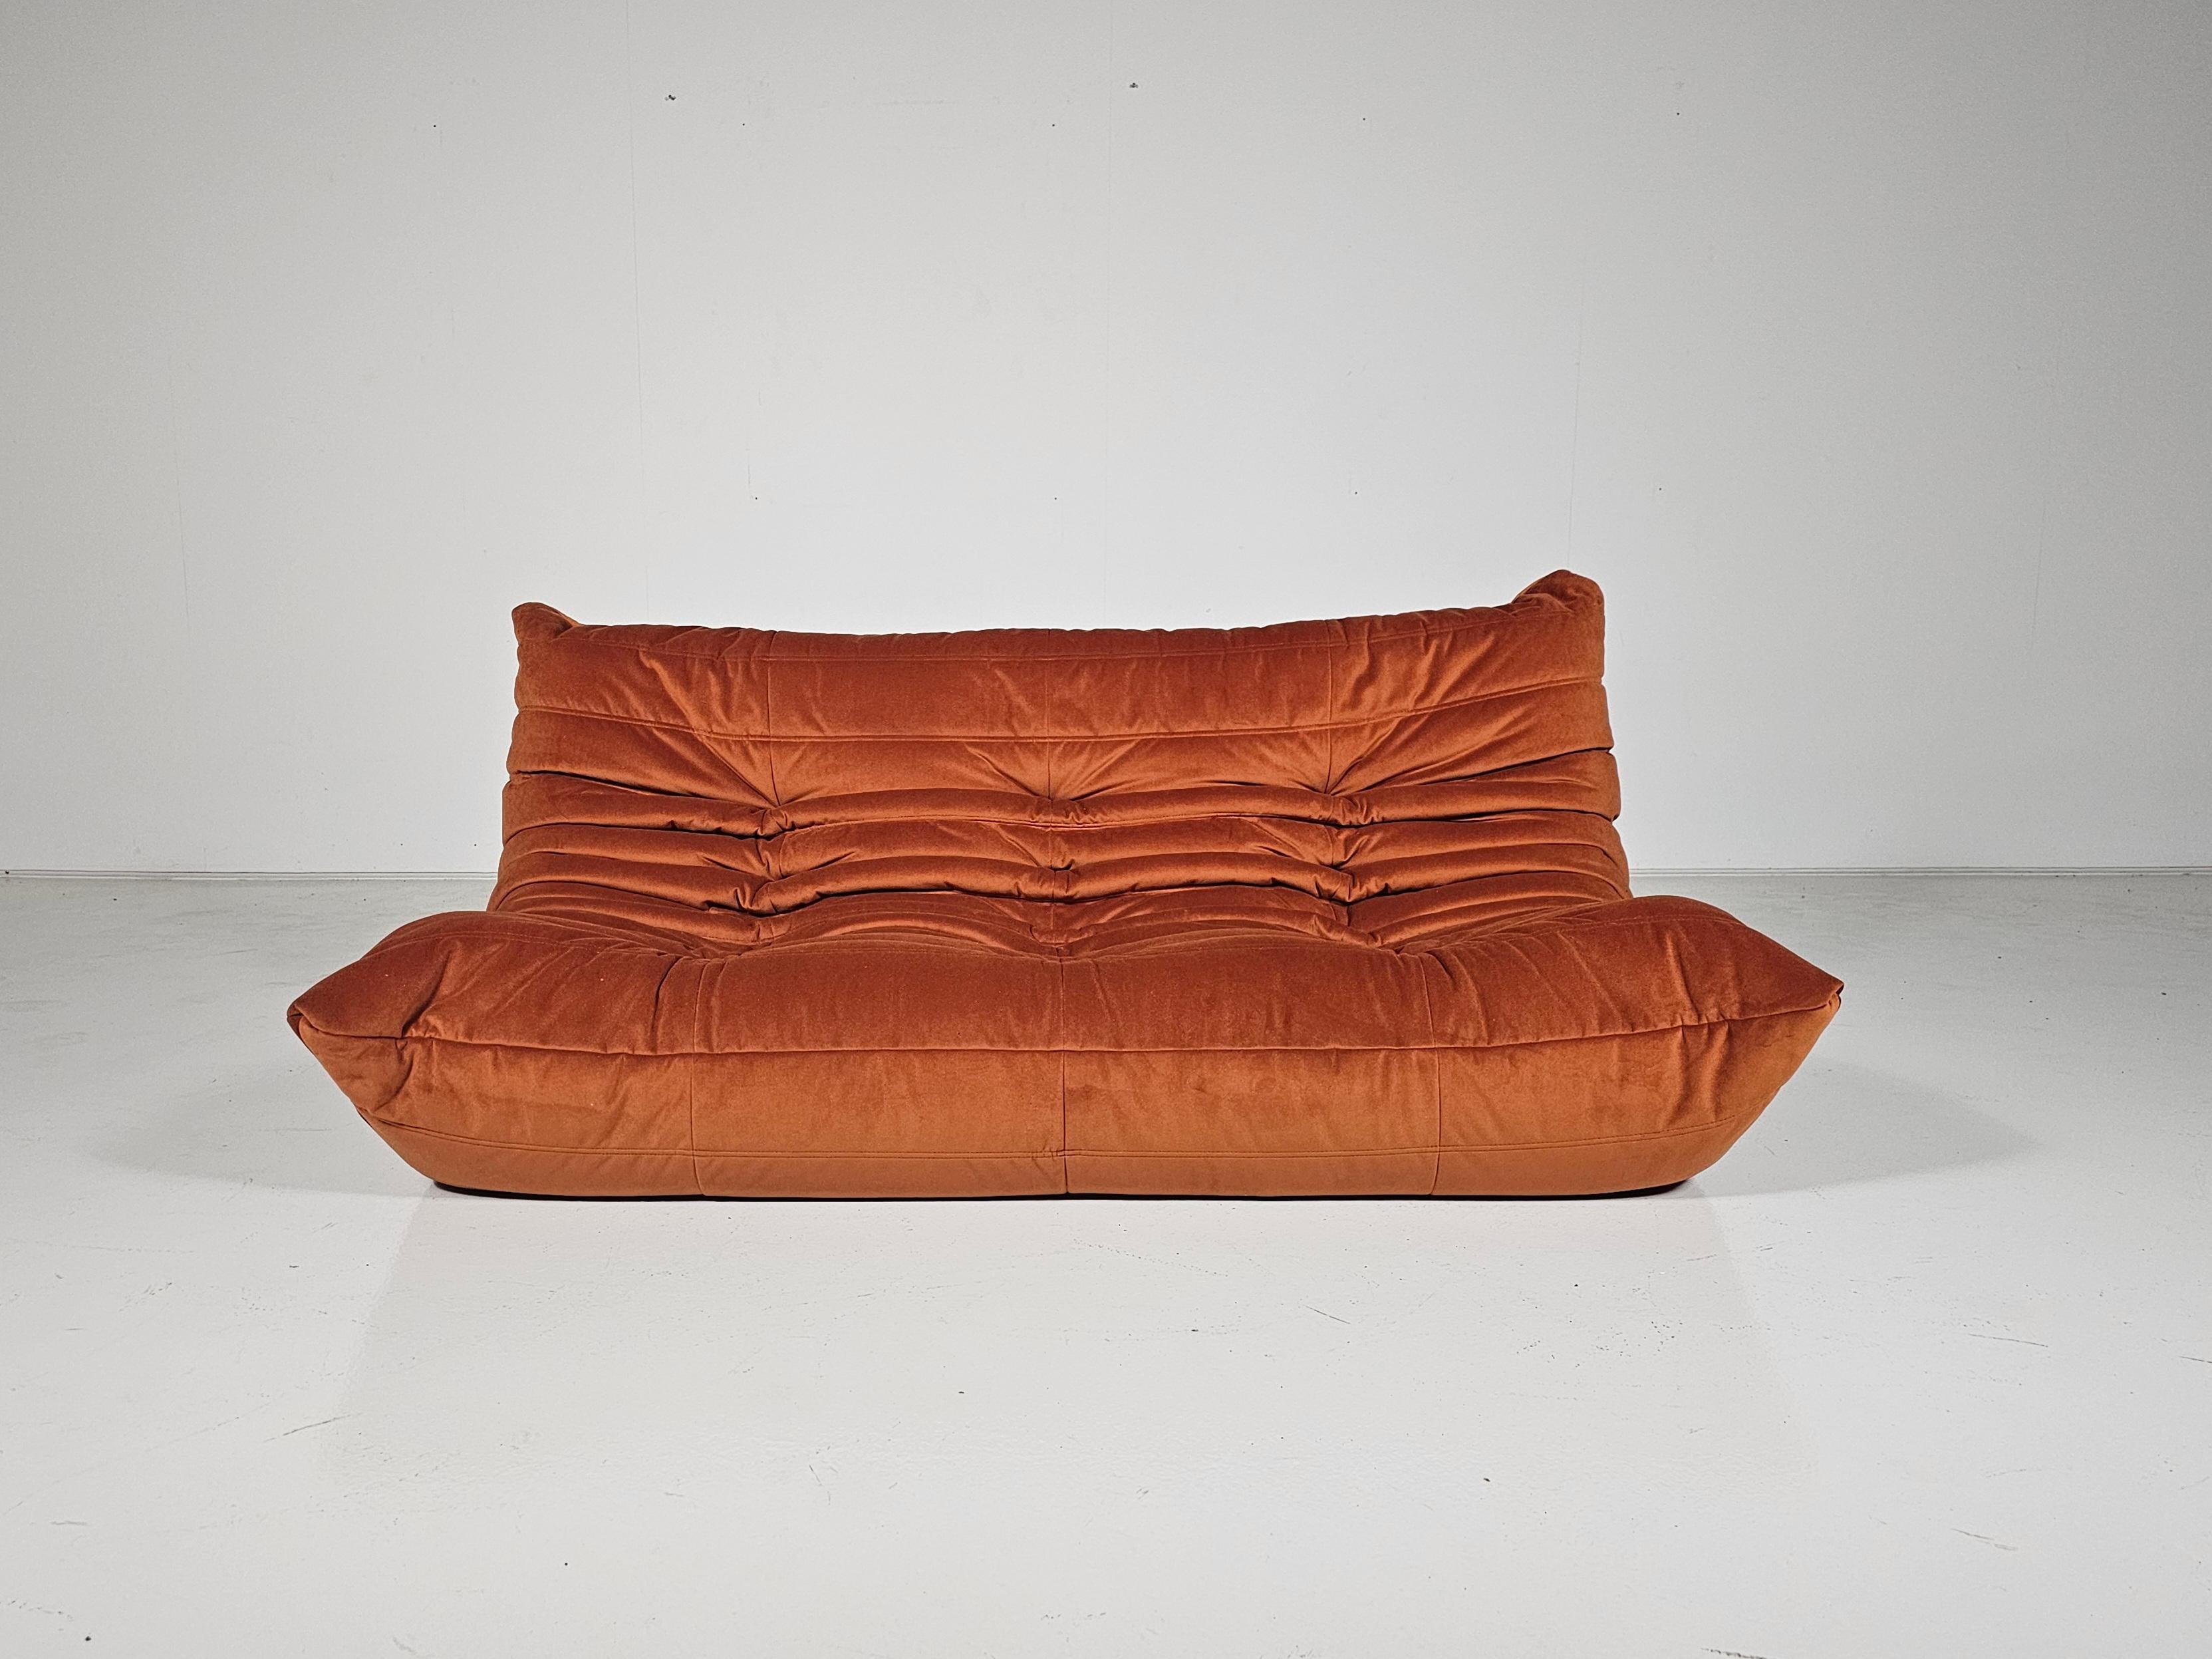 Togo sofa designed by Michel Ducaroy in the 1970s for Ligne Roset.
It shows a nice warm natural color tone and its famous wrinkled cozy design.
Lined underneath with original fabric and the original foam inside. Reupholstered in a high-quality